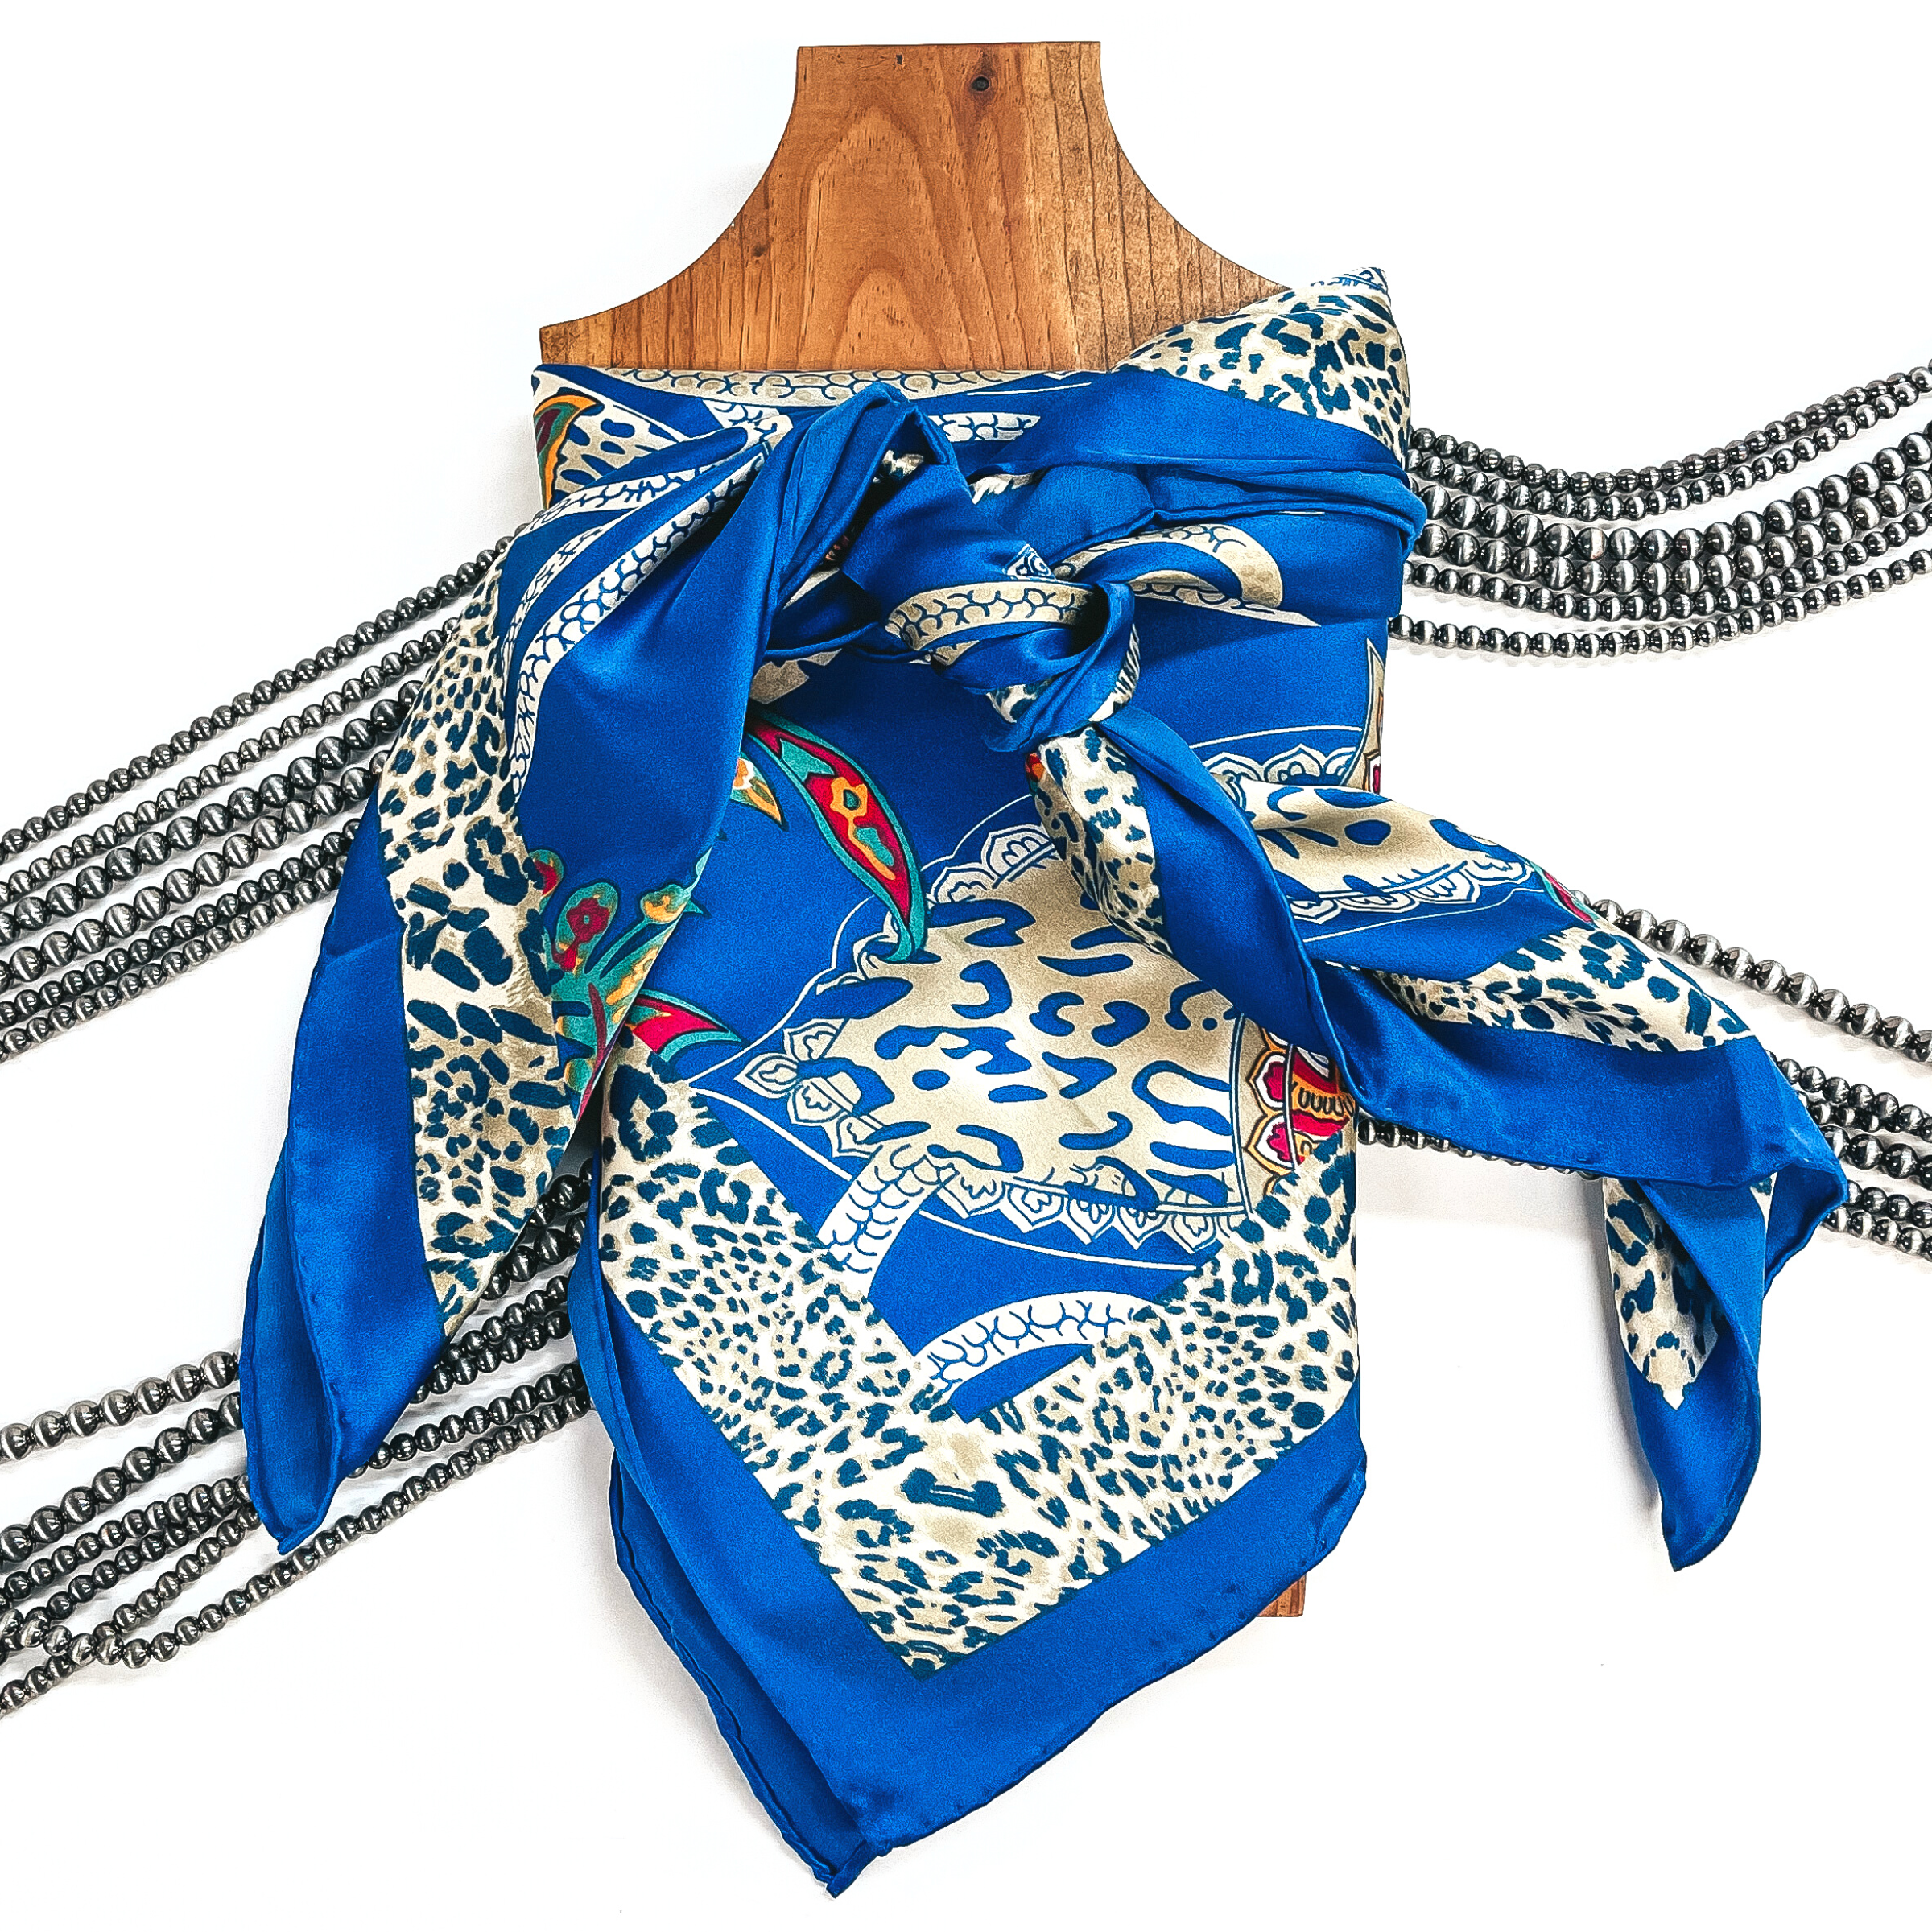 This is a silk wild rag in royal blue with charmuese print in various other prints such as leopard and paisley. The colors are beige, champagne gold, yellow, teal, green, pink, and orange. This wild rag is taken on a brown necklace board and white background with silver Navajo pearls in the back as decor.